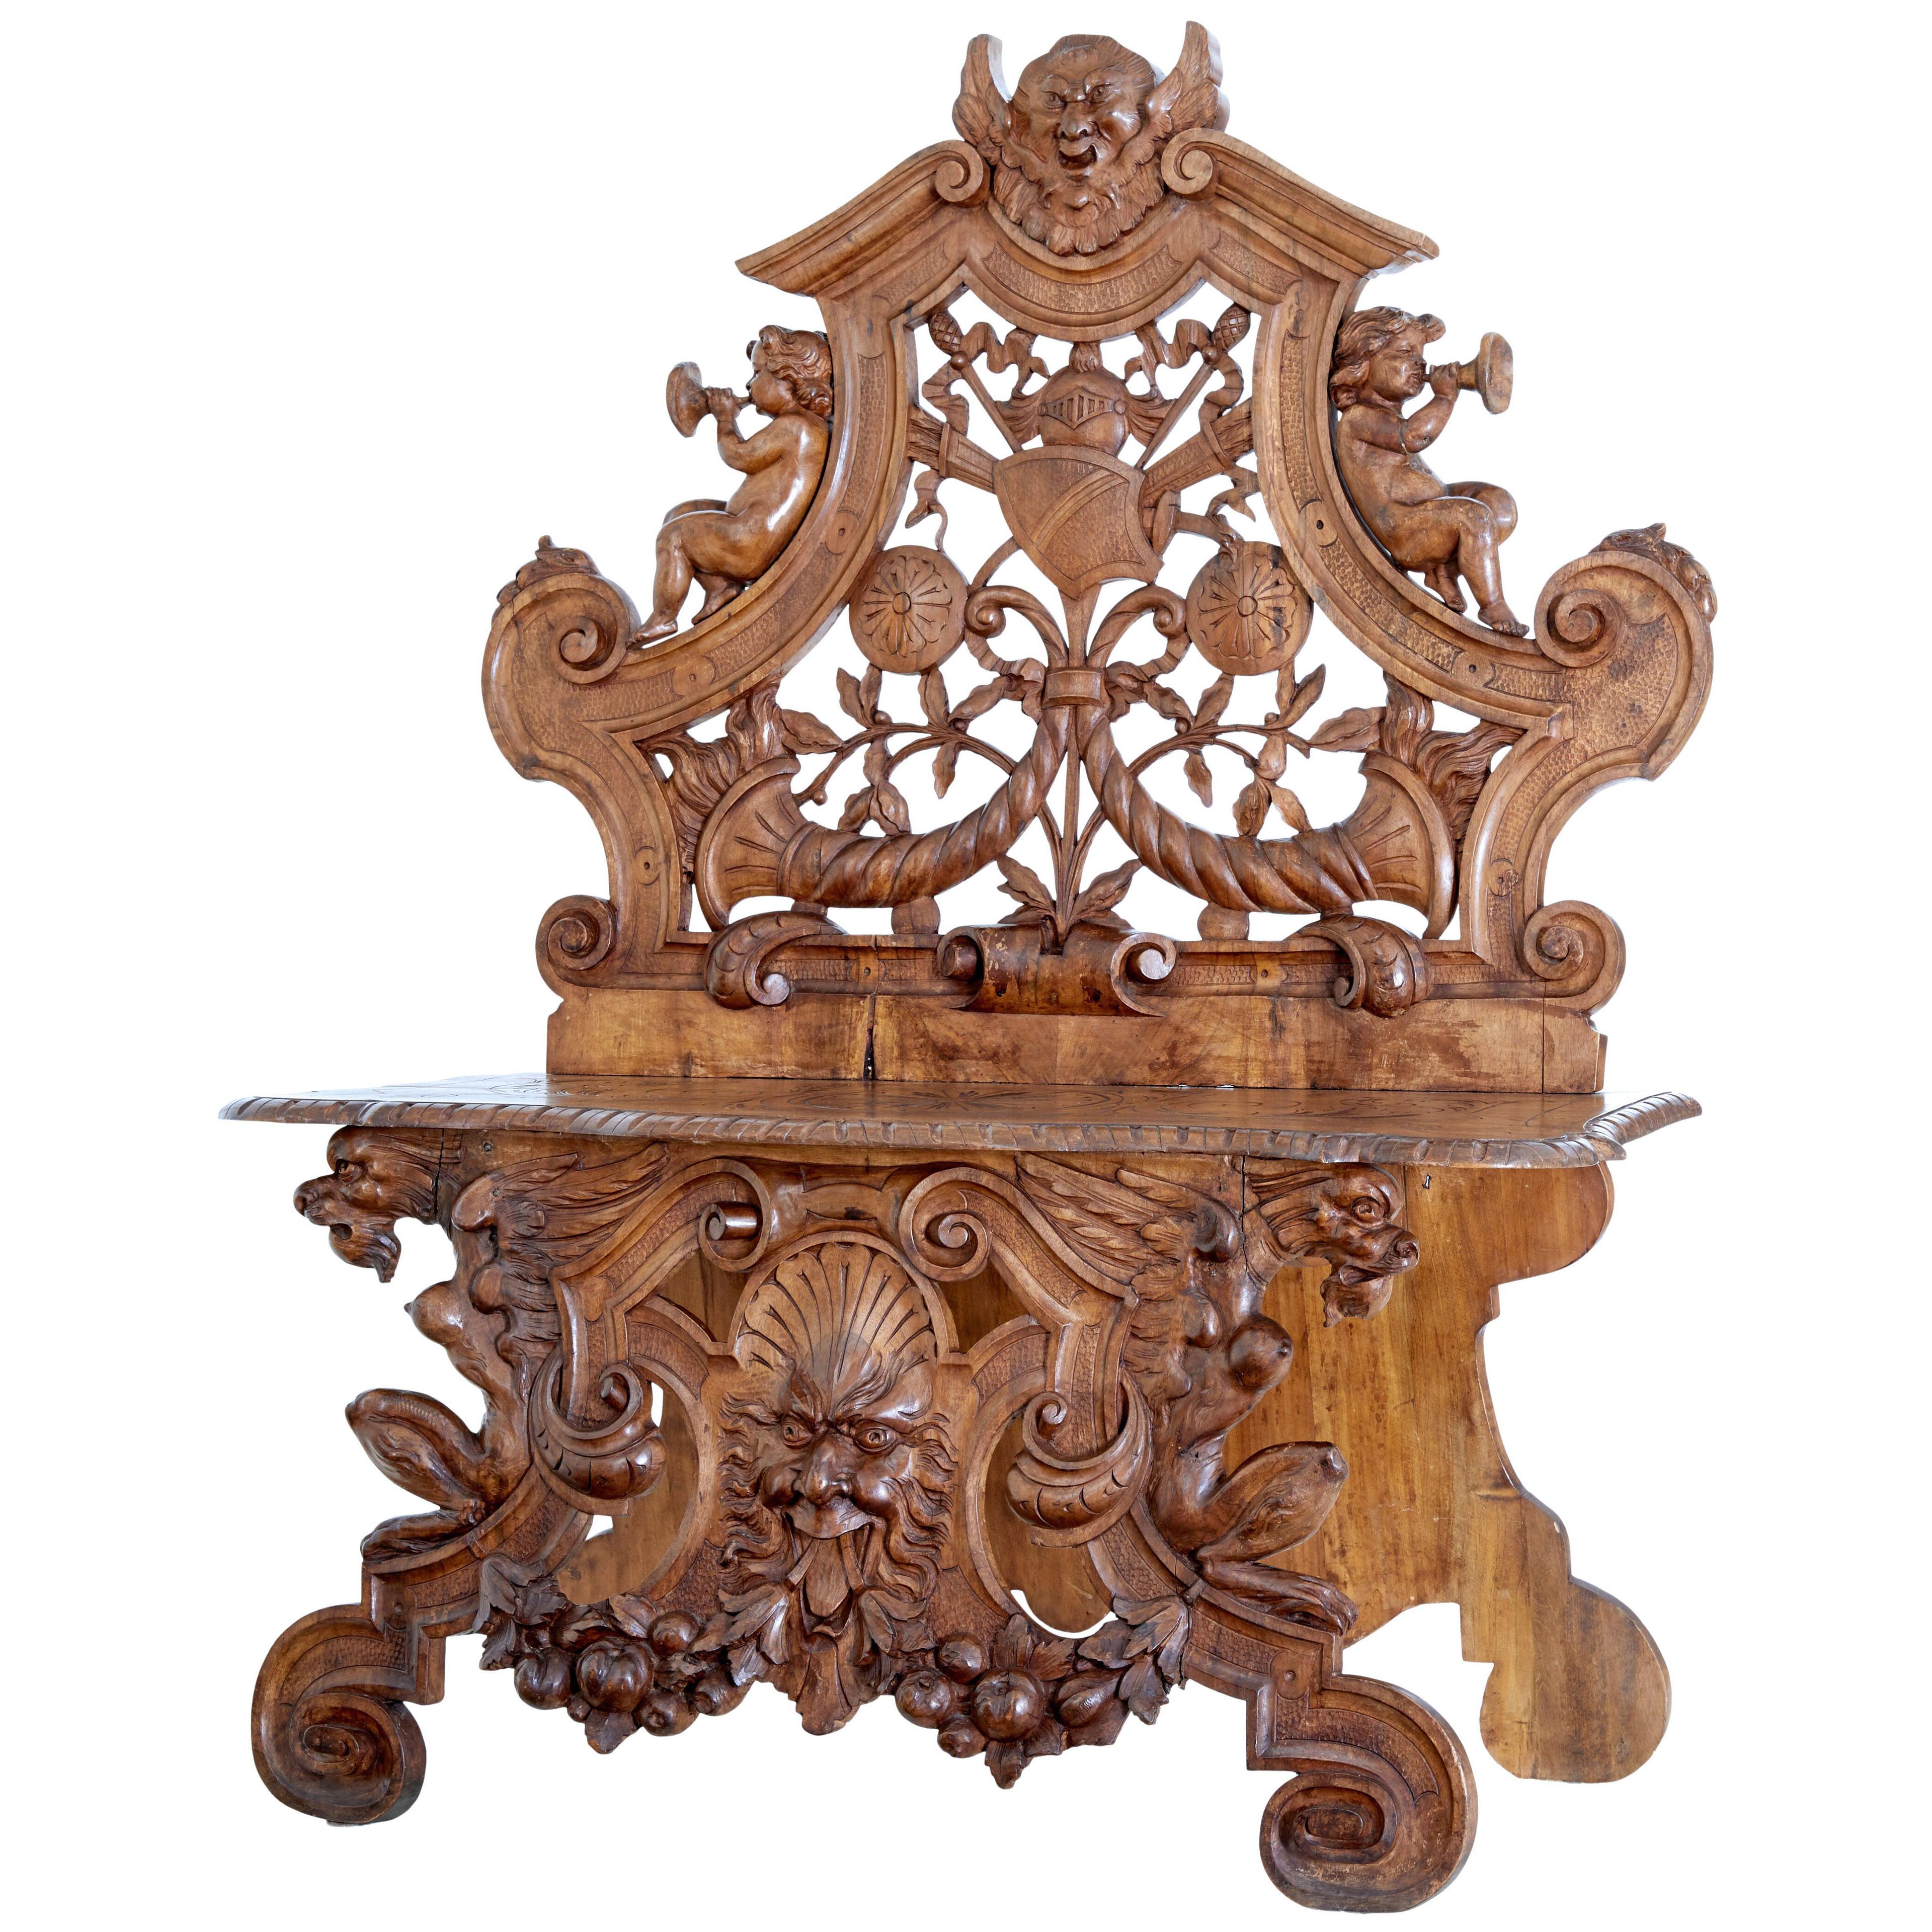 19TH CENTURY HEAVILY CARVED FLEMISH WALNUT DECORATIVE CHAIR